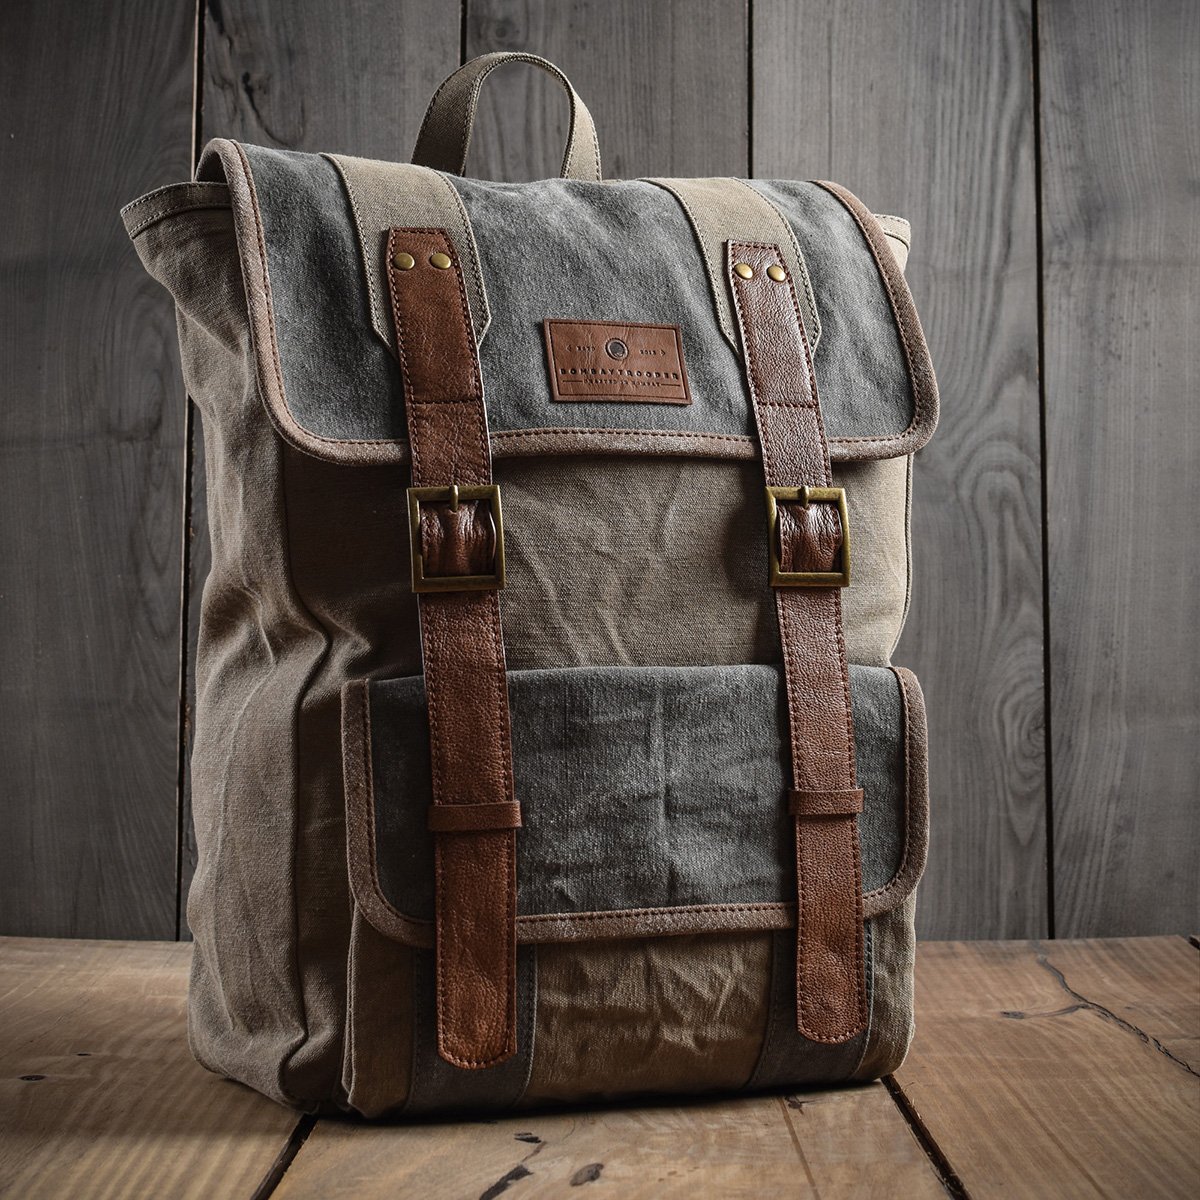 Foxtrot Backpack: Upcycled Eco-Friendly Canvas Backpack For Men & Women ...